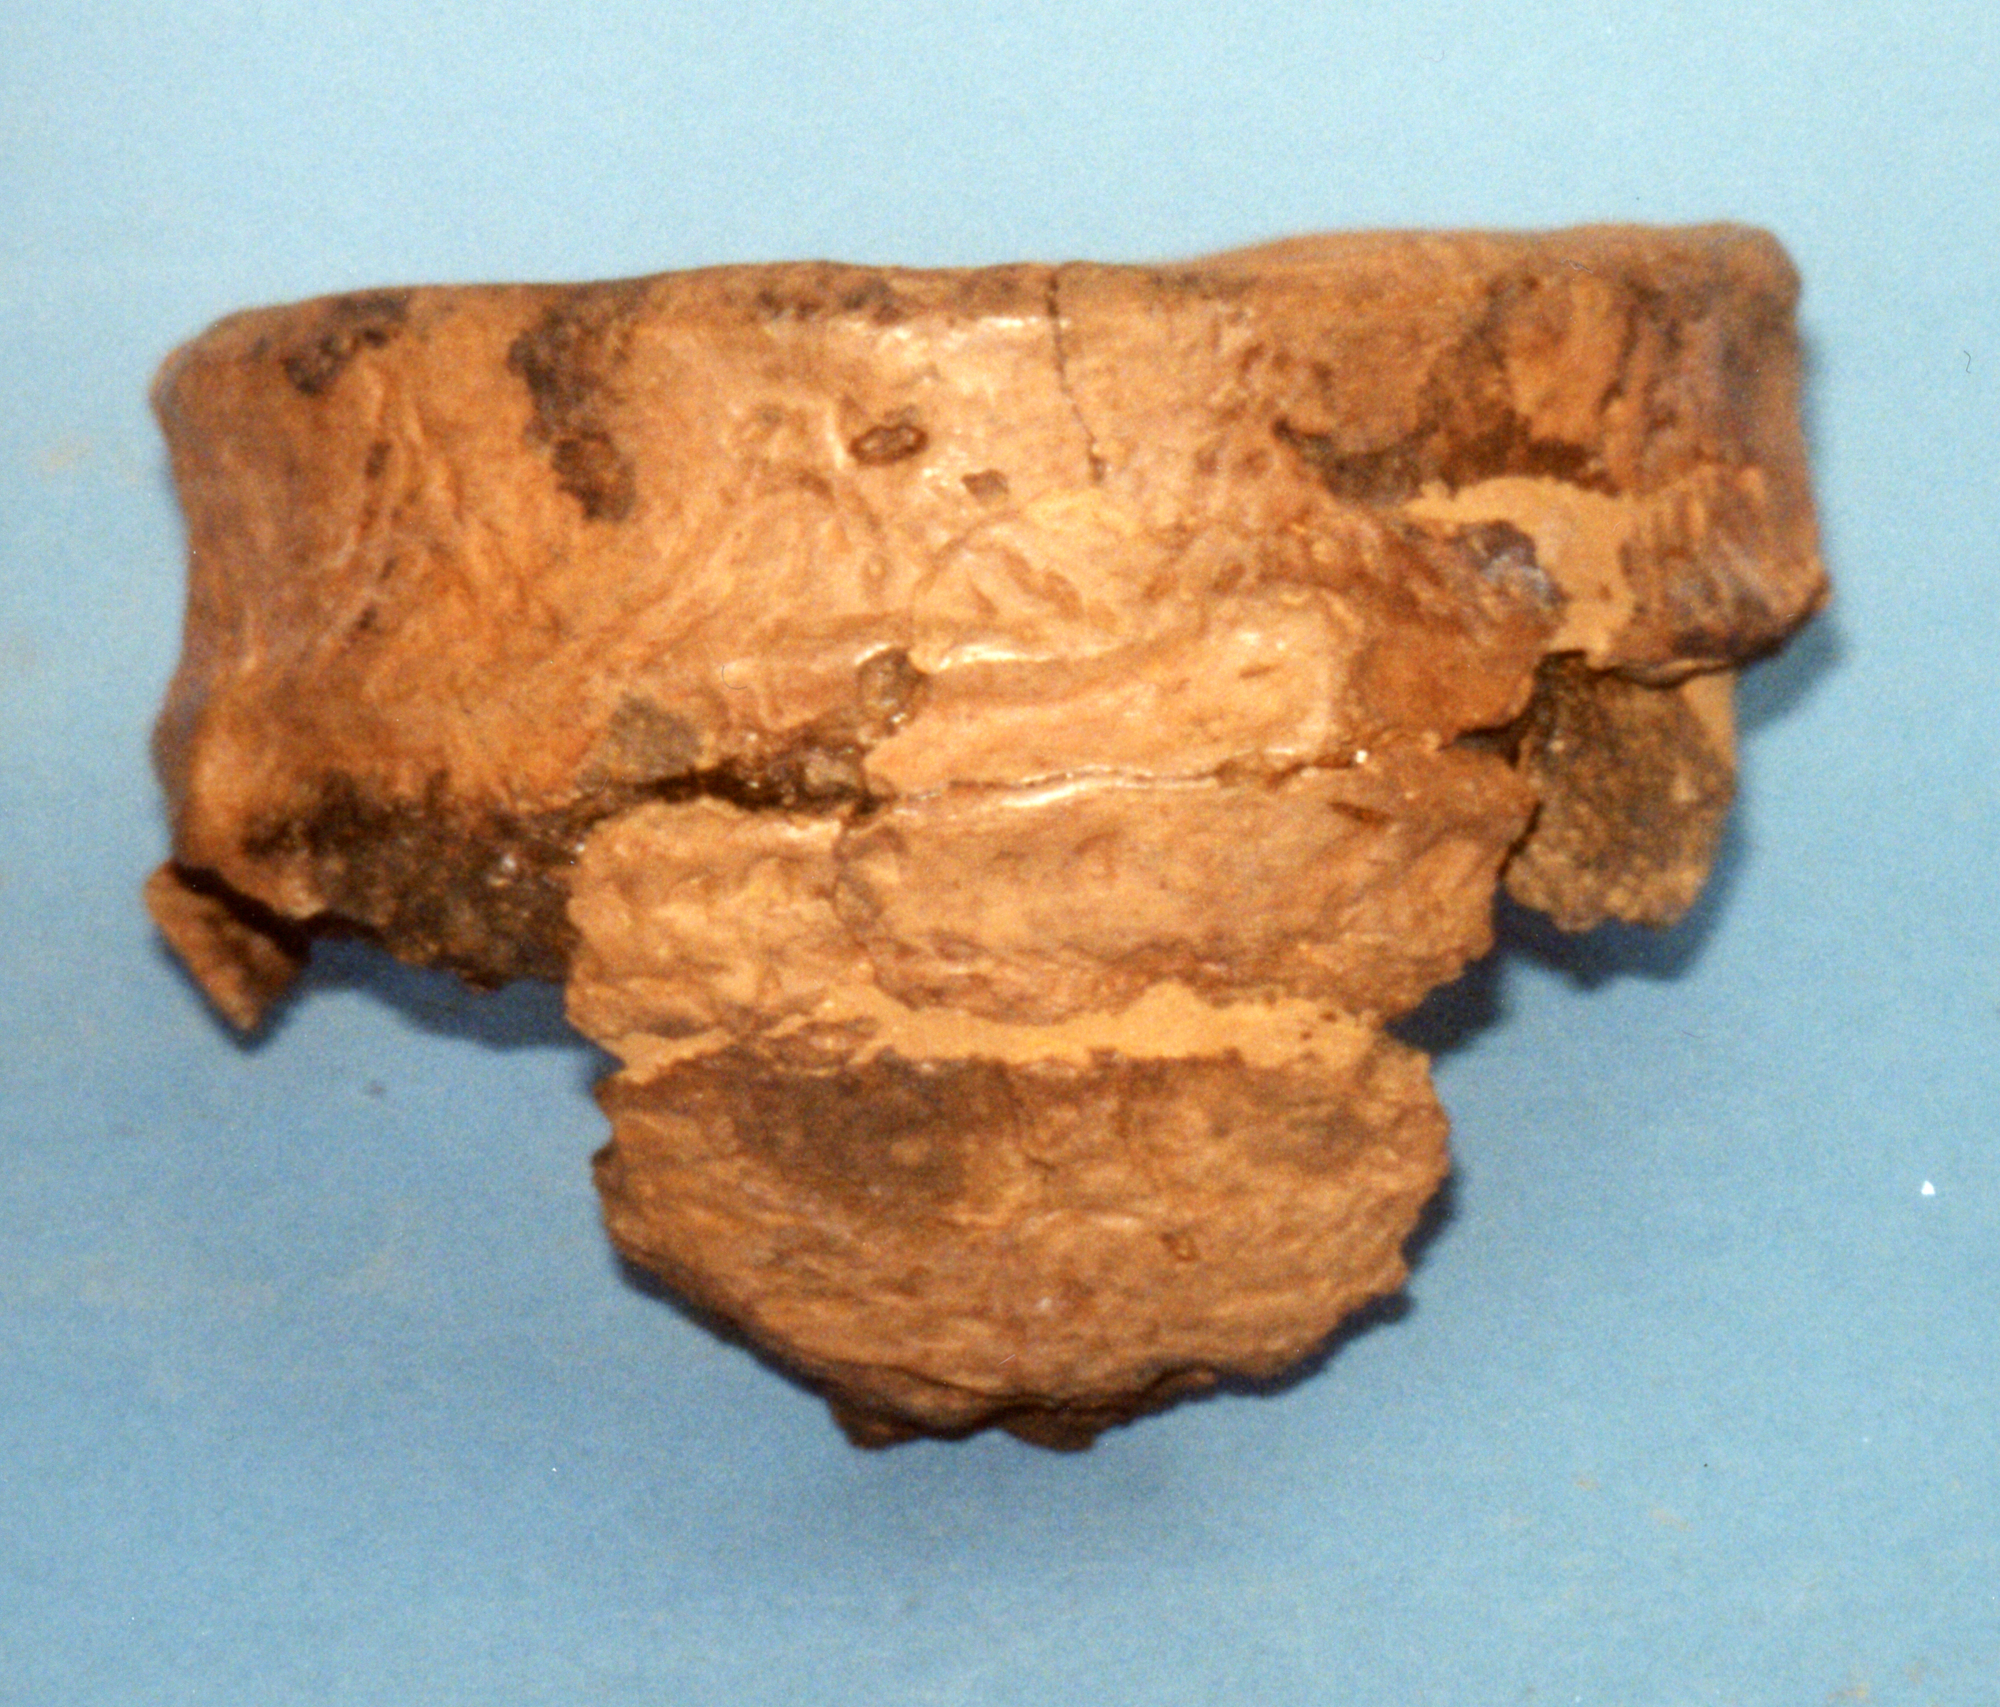 Image of Pottery food vessel, from Limefield Farm, Wiston, Lanarkshire © National Museums Scotland